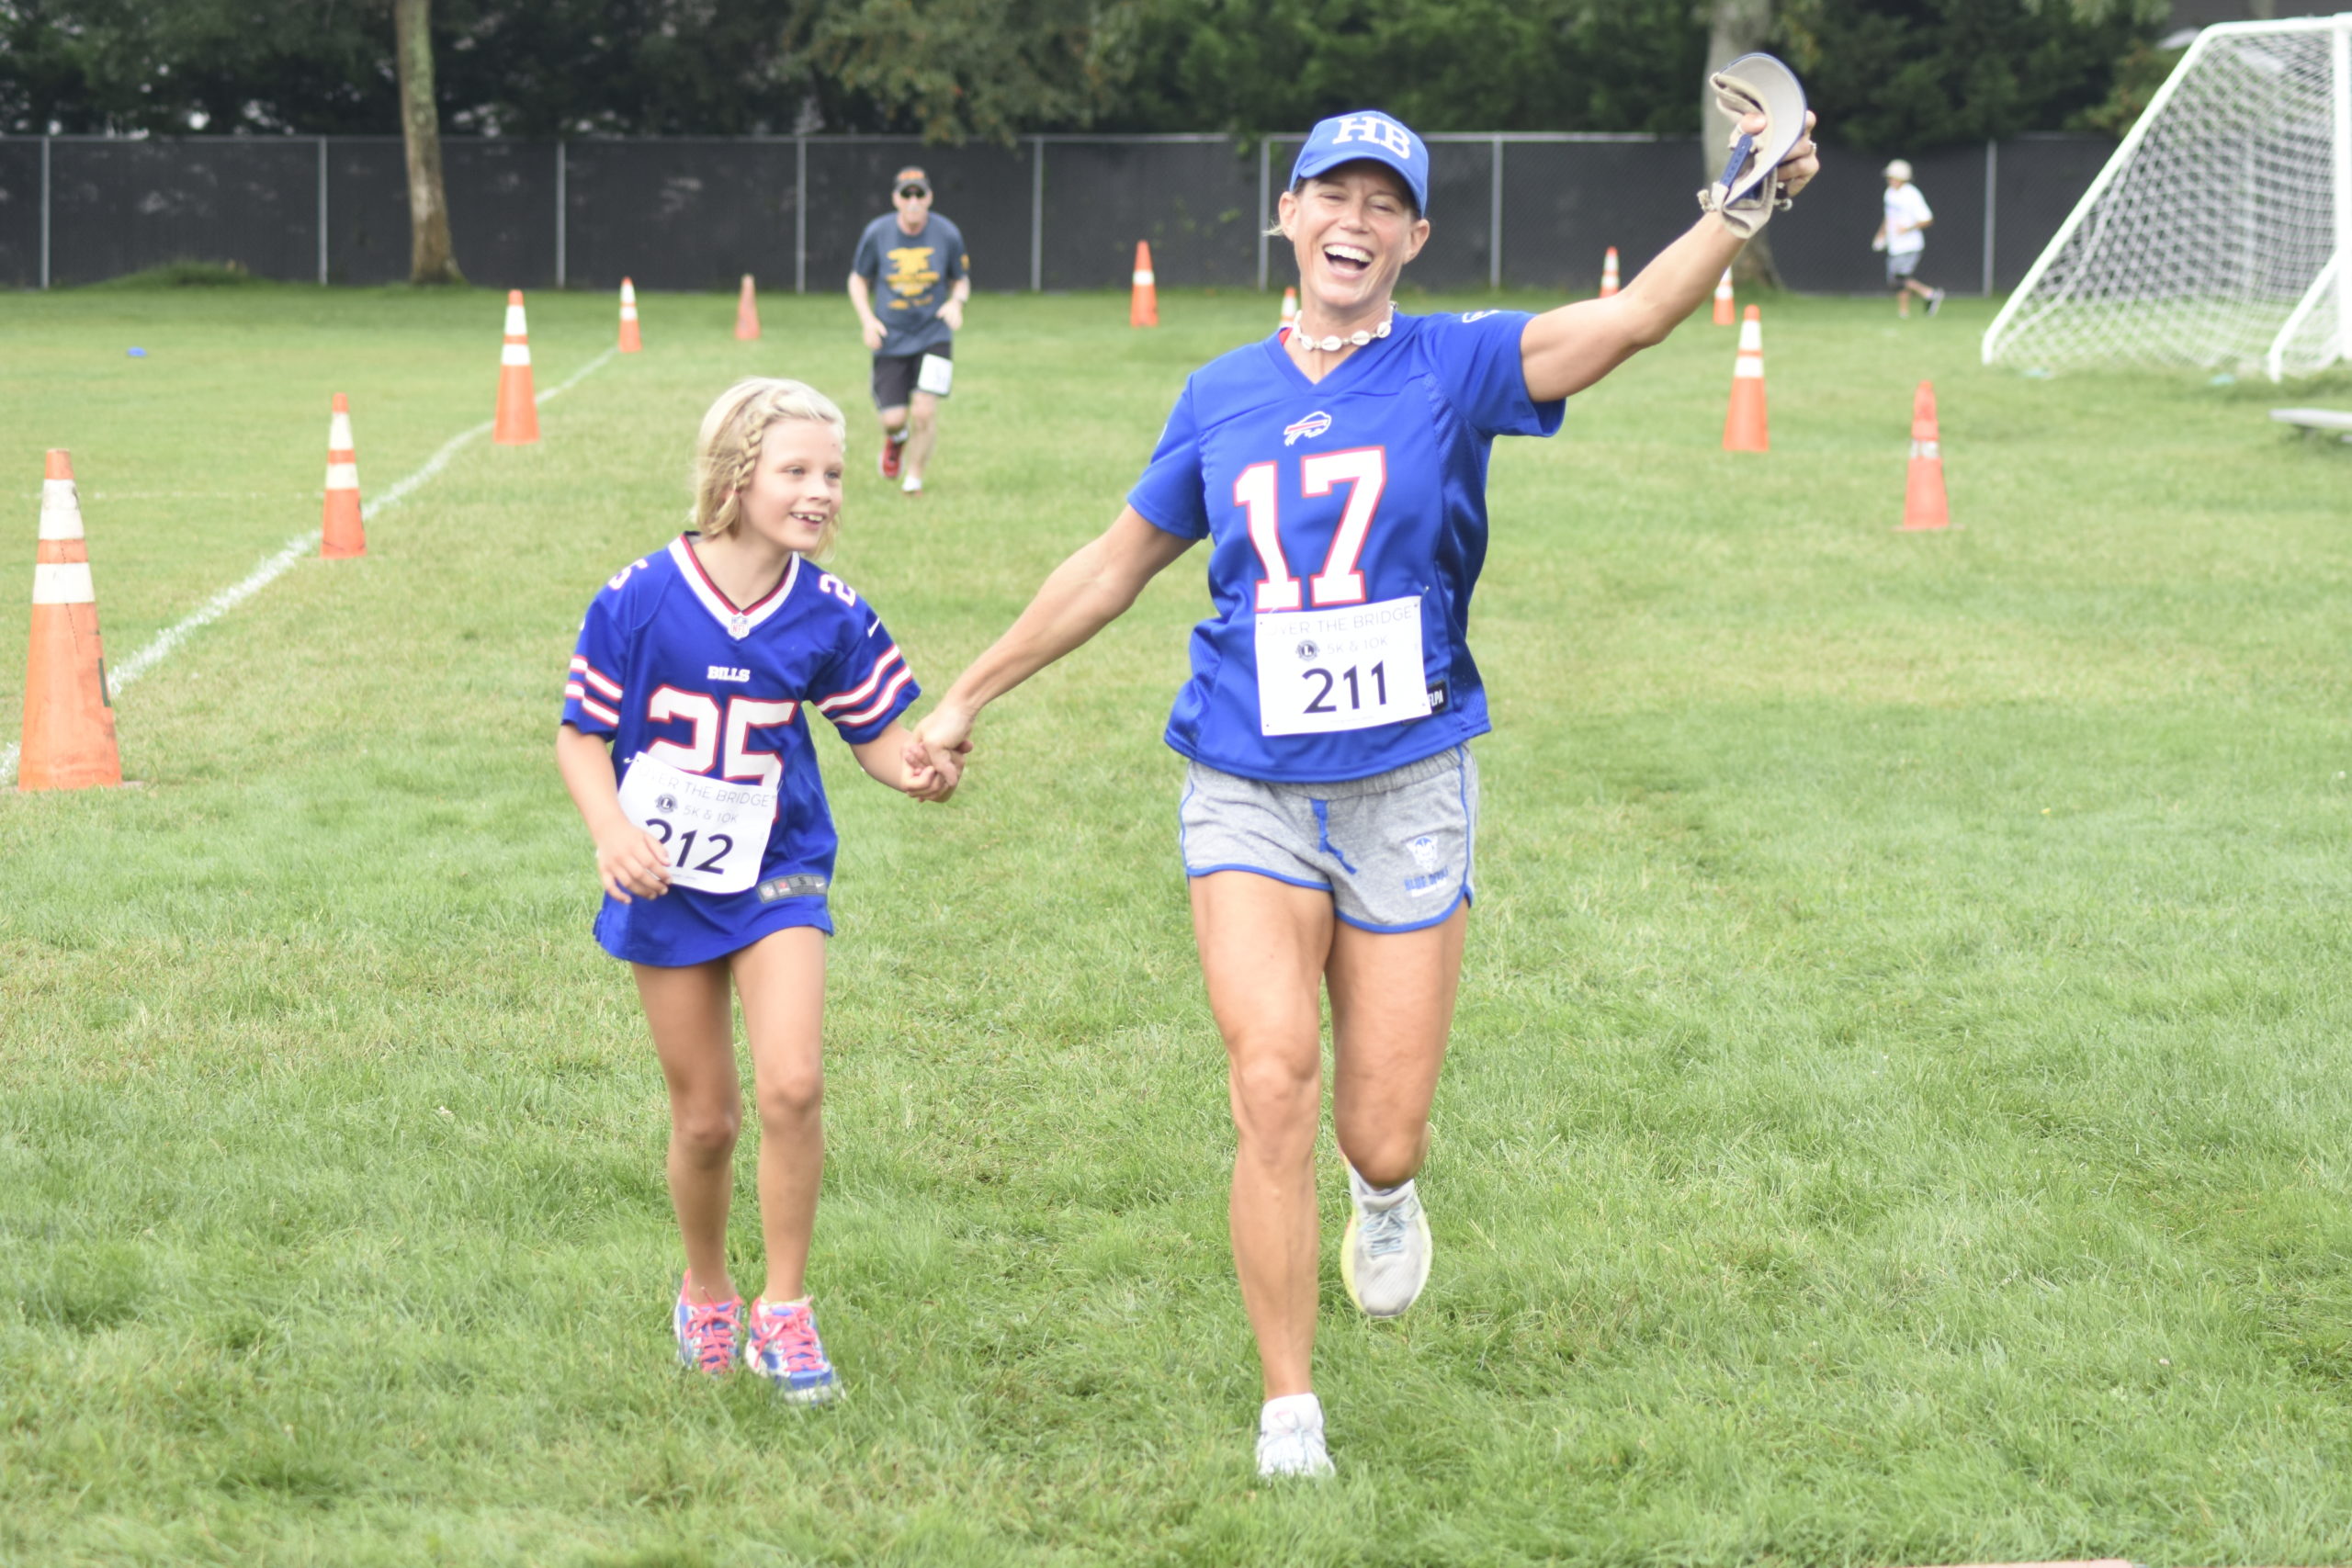 Anabel, left, and Jessica Ramsay of Hampton Bays cross the finish line together.